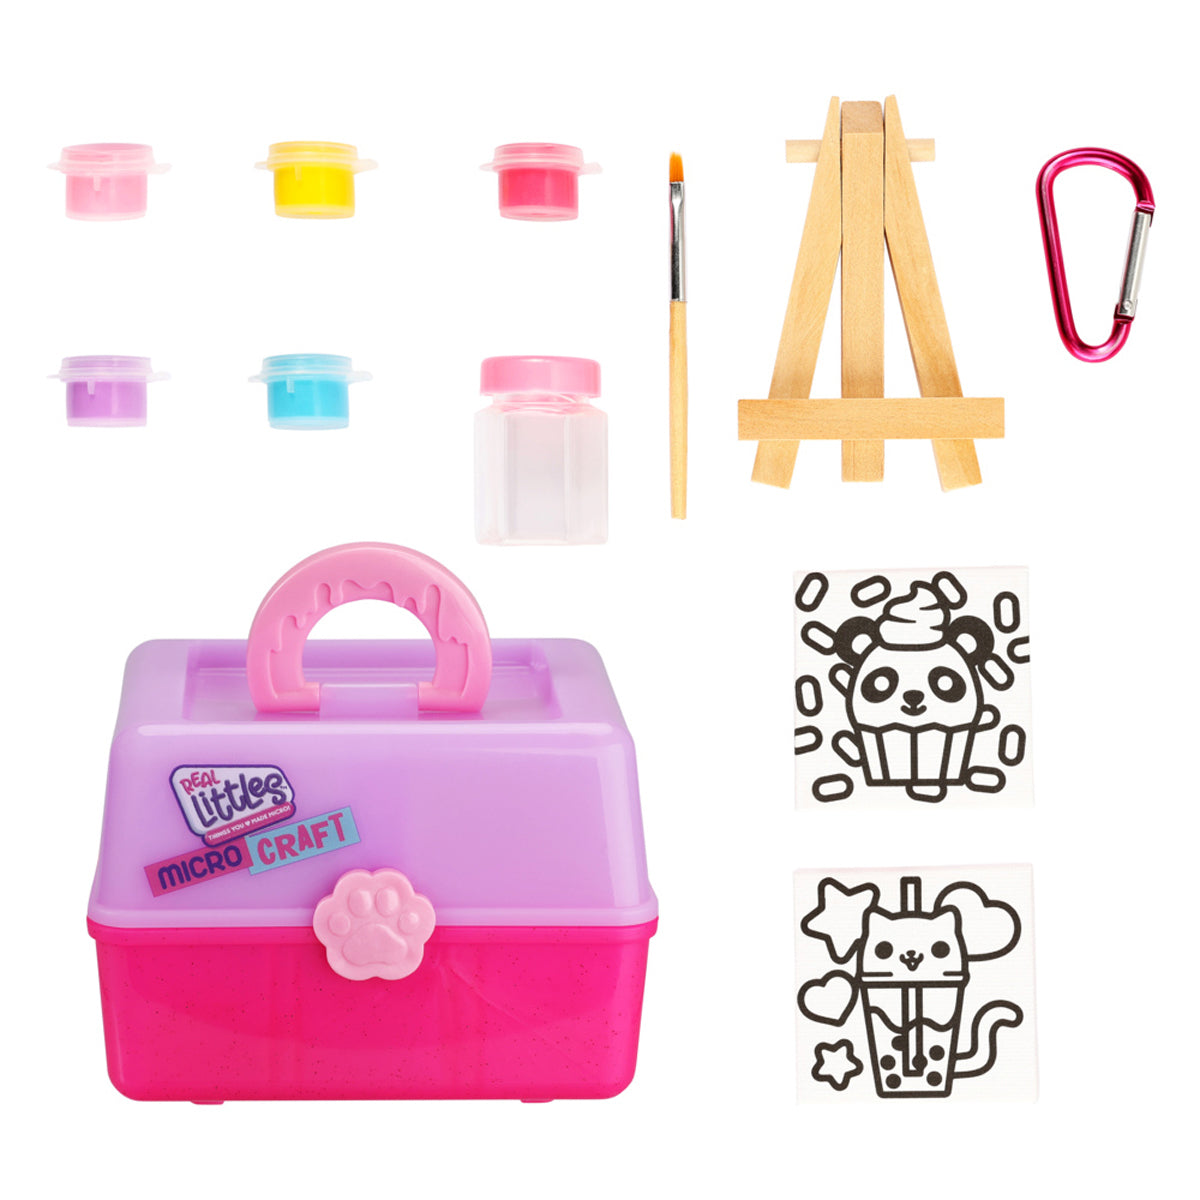 Real Littles Micro Craft Set (Styles Vary)